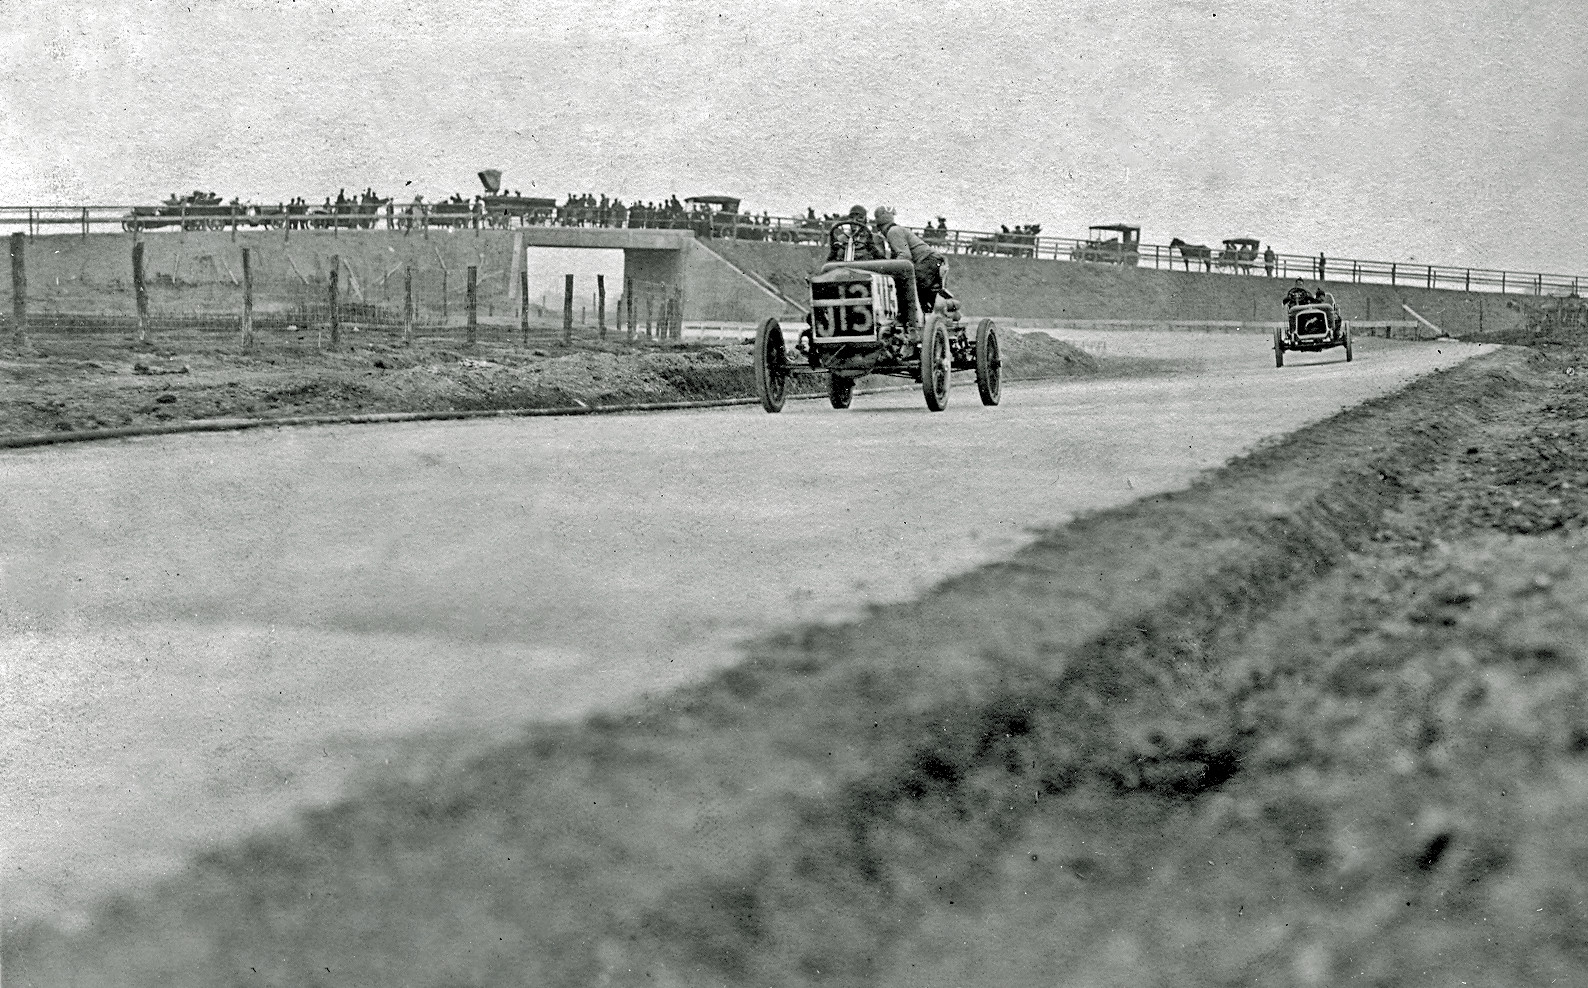 Racers zipped through East Meadow on the opening day of the parkway on Oct. 10, 1908.